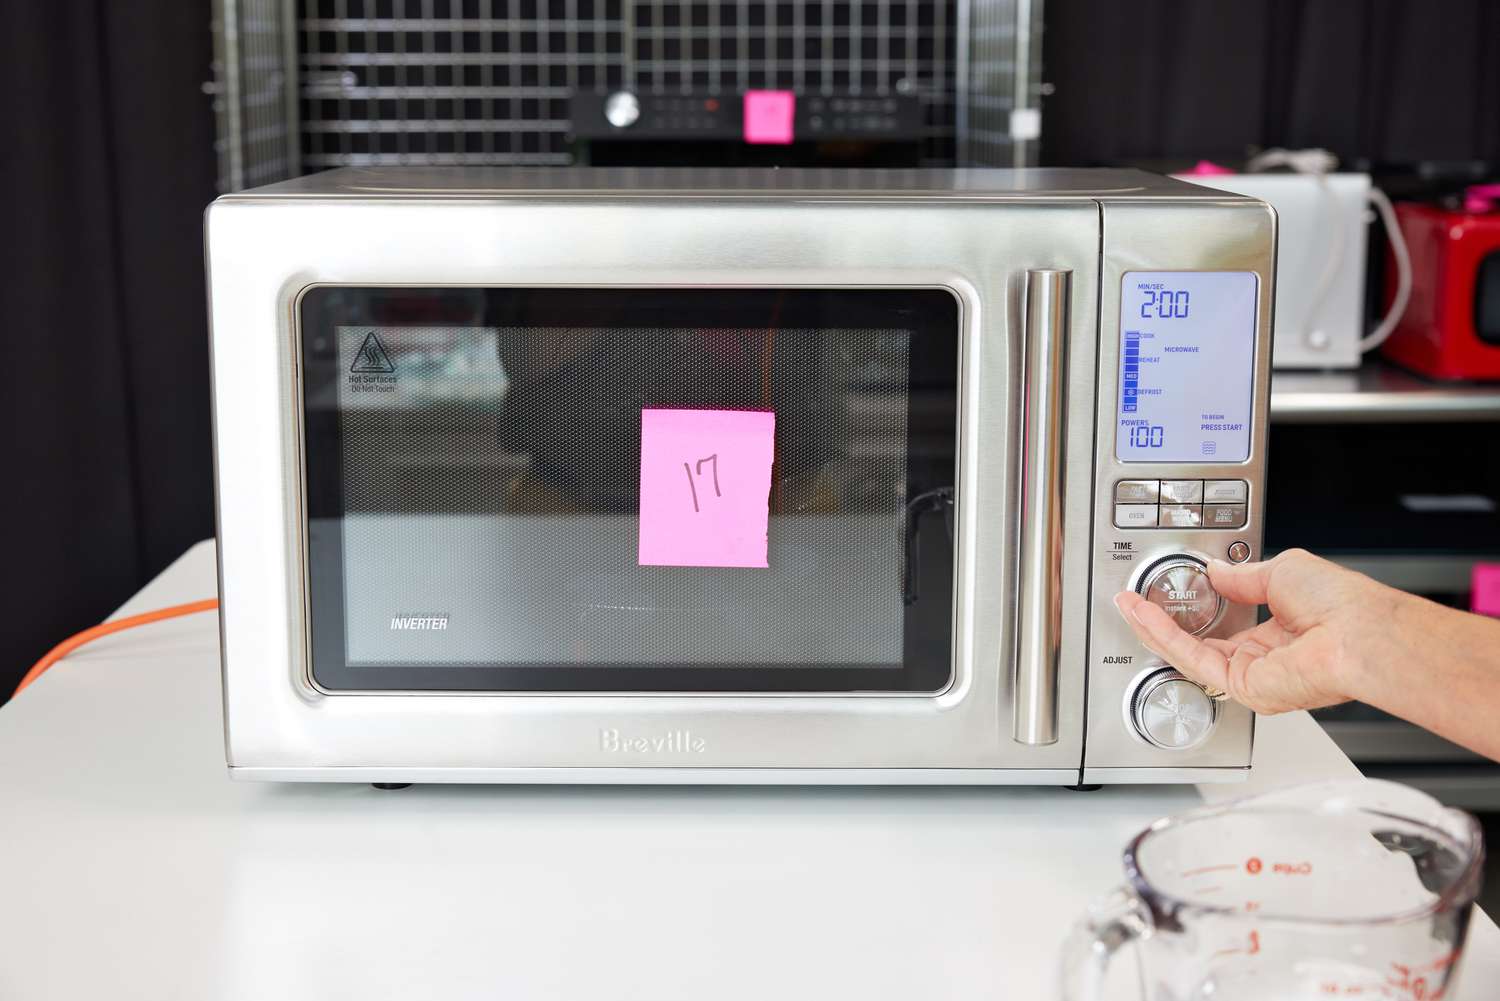 using the presets on a microwave oven